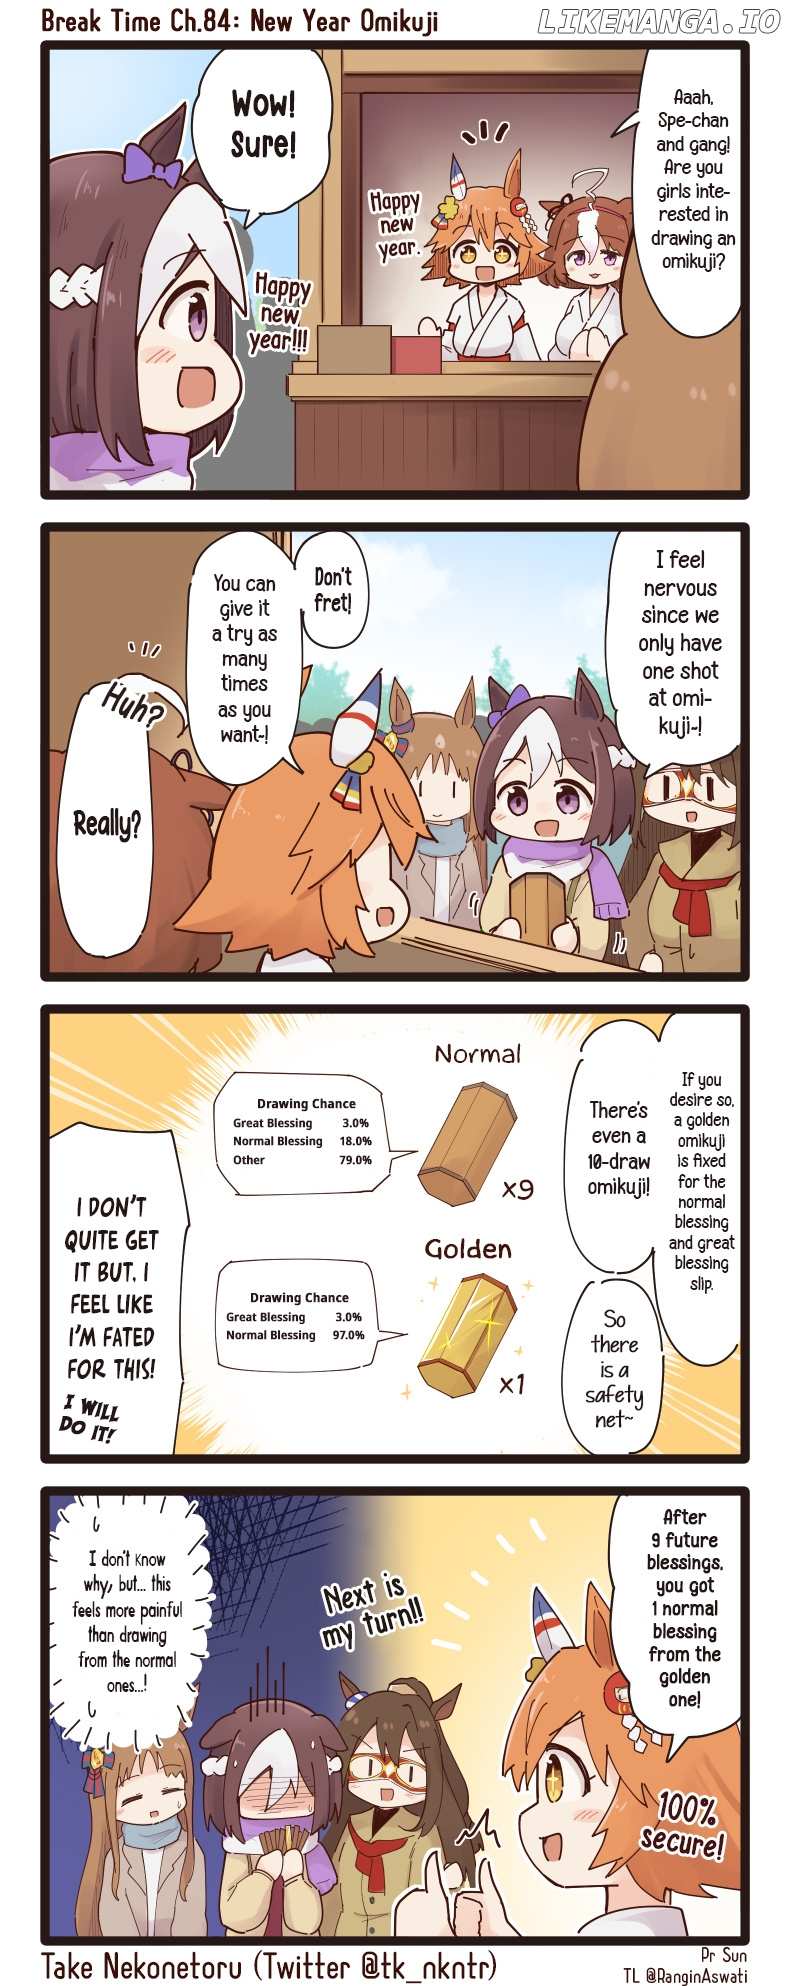 Uma Musume - Break Time chapter 84 - page 1